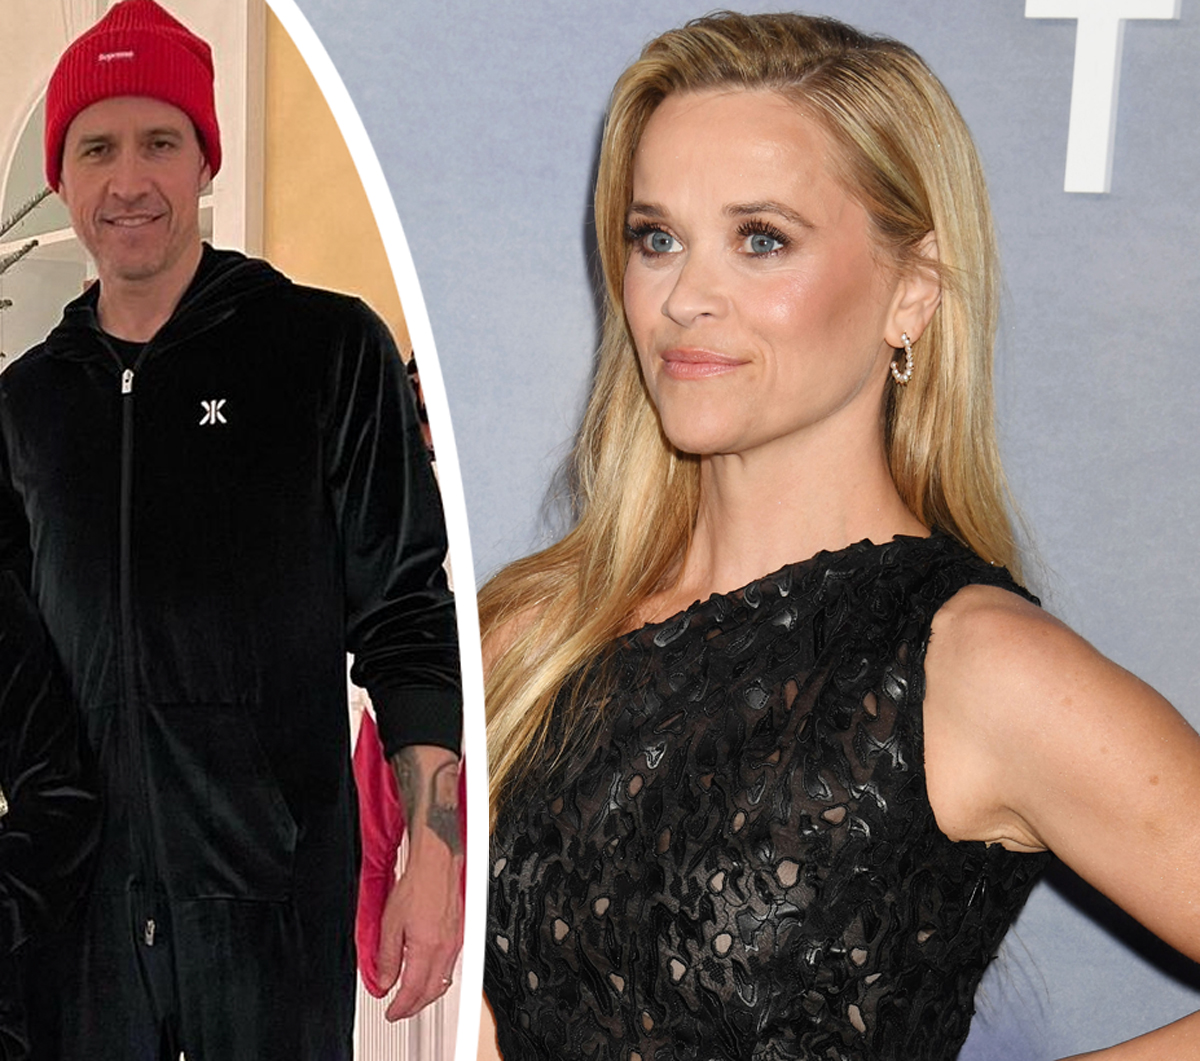 REVEALED: How Reese Witherspoon & Jim Toth Divided Assets In Super Efficient Divorce